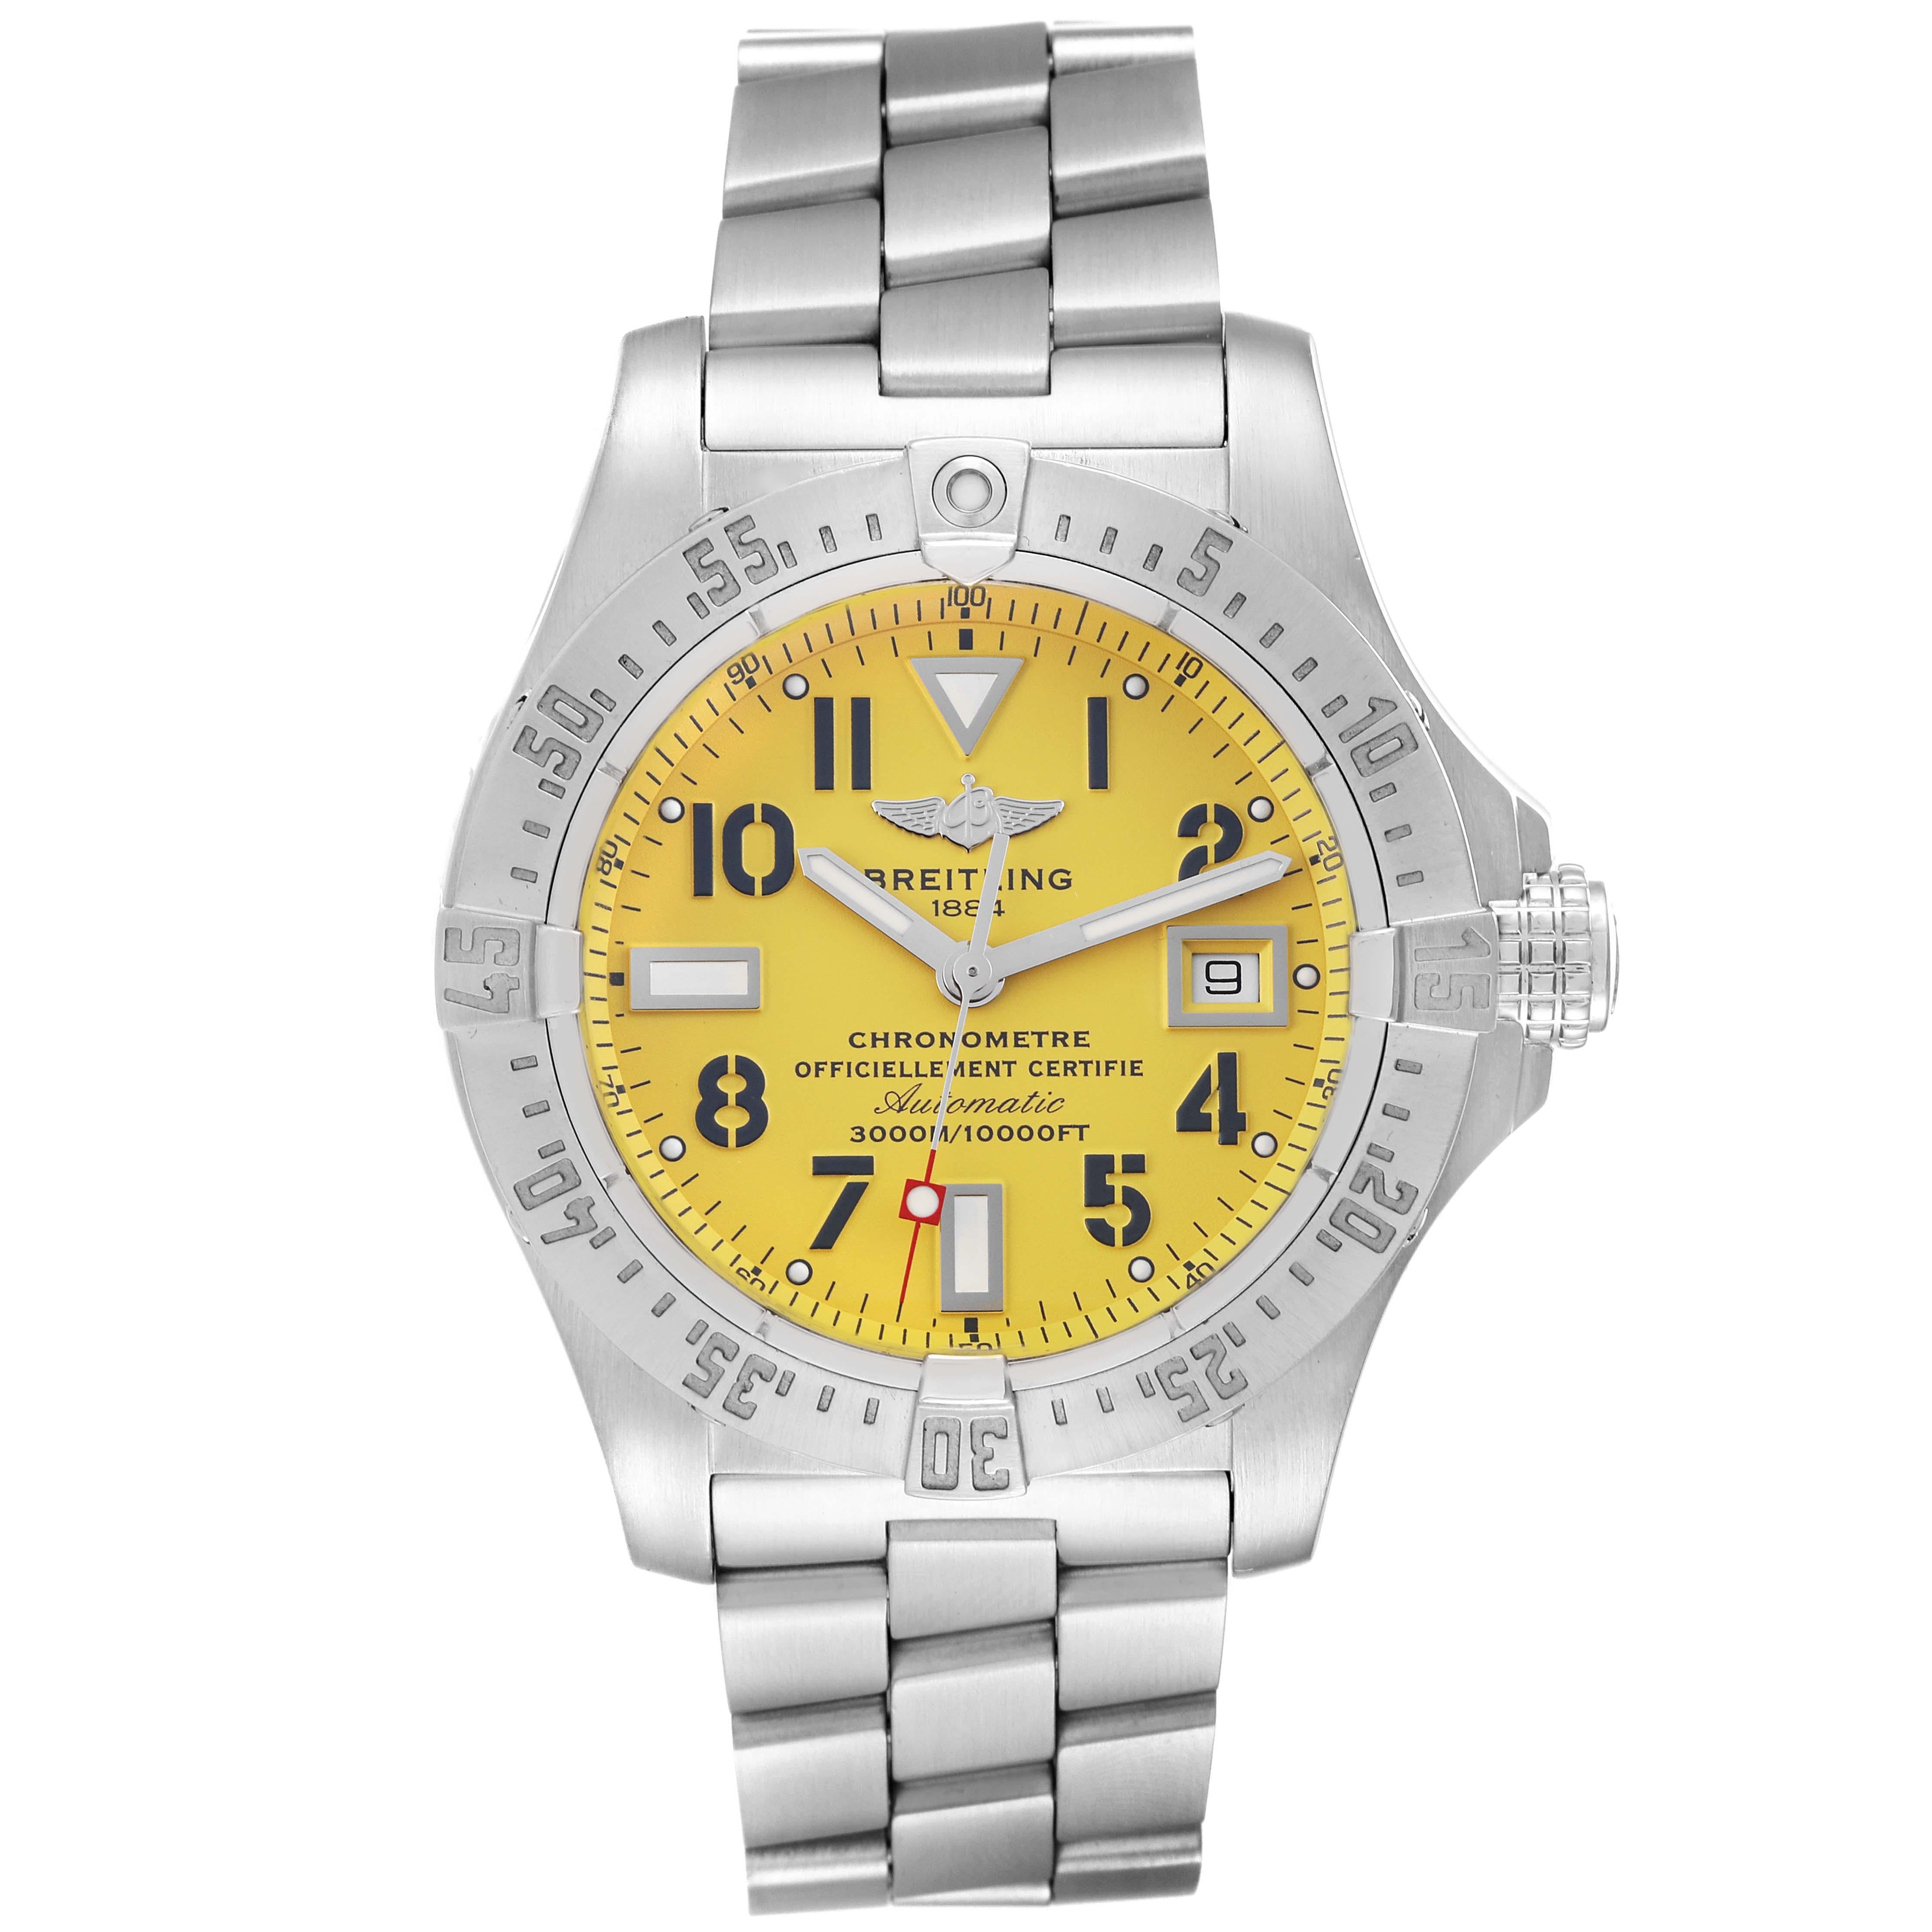 Breitling Avenger Seawolf Yellow Dial Steel Mens Watch A17330 Box Papers. Automatic self-winding movement. Stainless steel case 45.4 mm in diameter with screwed-down crown and pushers. Stainless steel unidirectional rotating bezel. 0-60